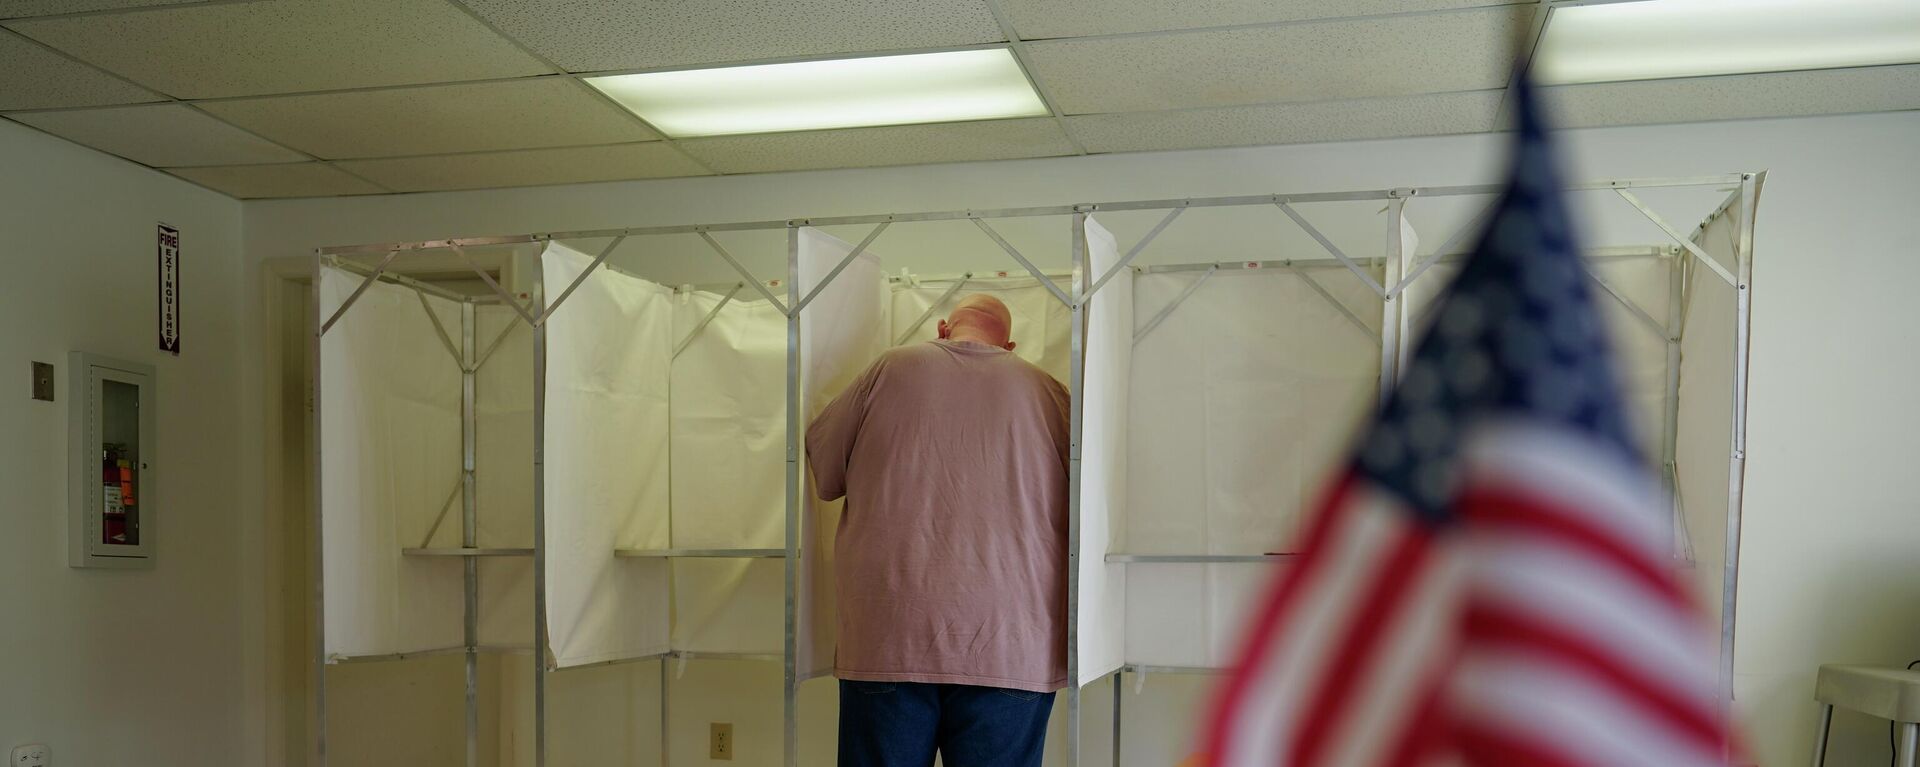 FILE - A voter fills out a ballot during the Pennsylvania primary election at the Michaux Manor Living Center in Fayetteville, Pa., May 17, 2022. As the 2022 midterm elections enter their final two-month sprint, leading Republicans concede that their party's advantage may be slipping even as Democrats confront their president's weak standing, deep voter pessimism and the weight of history this fall. - Sputnik International, 1920, 14.09.2022